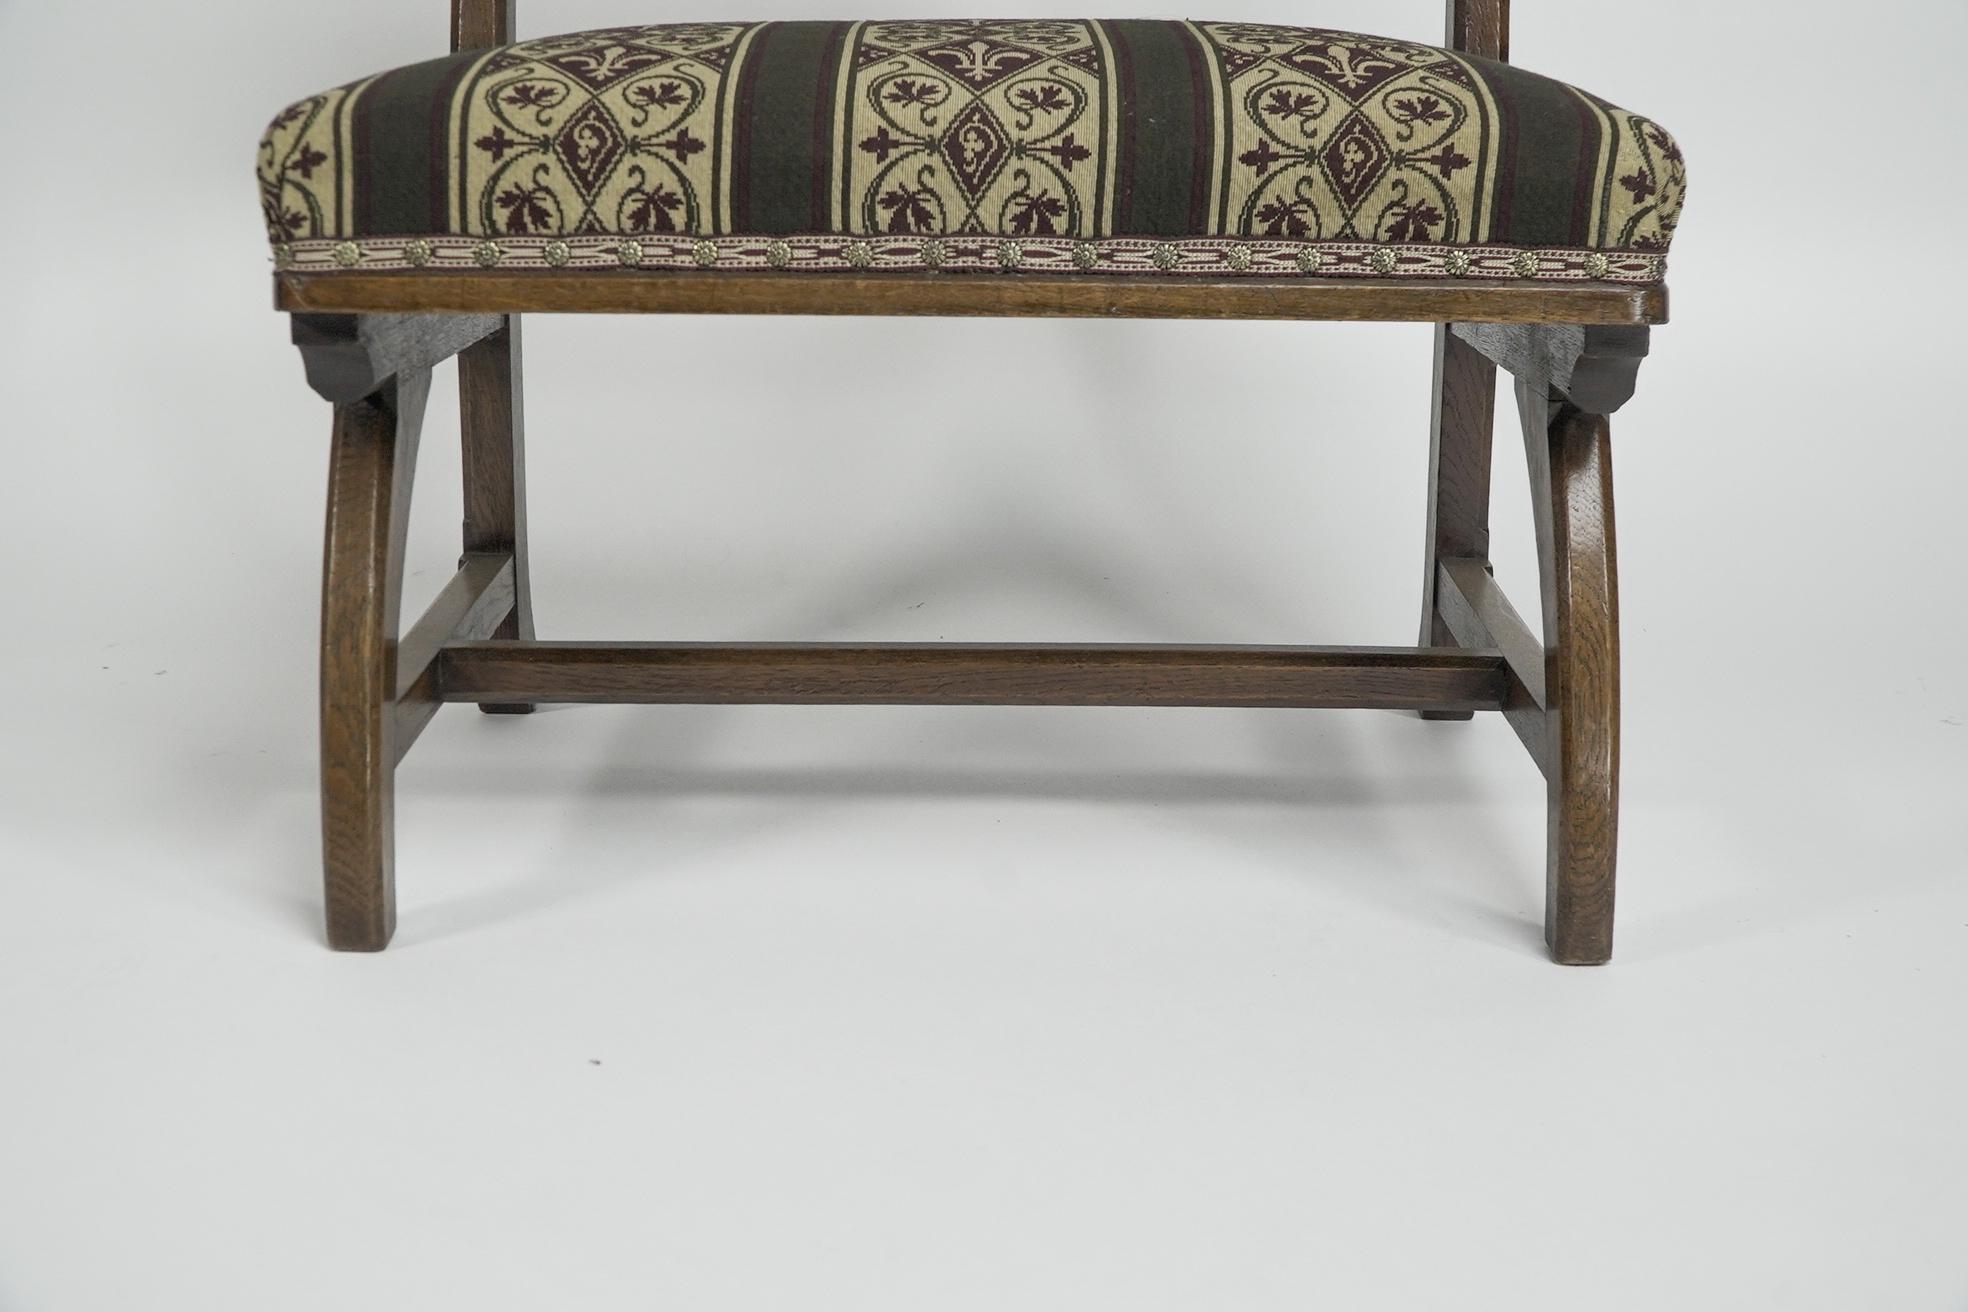 E W Pugin attri. A Gothic Revival oak duet chair with a wider than usual seat. For Sale 8